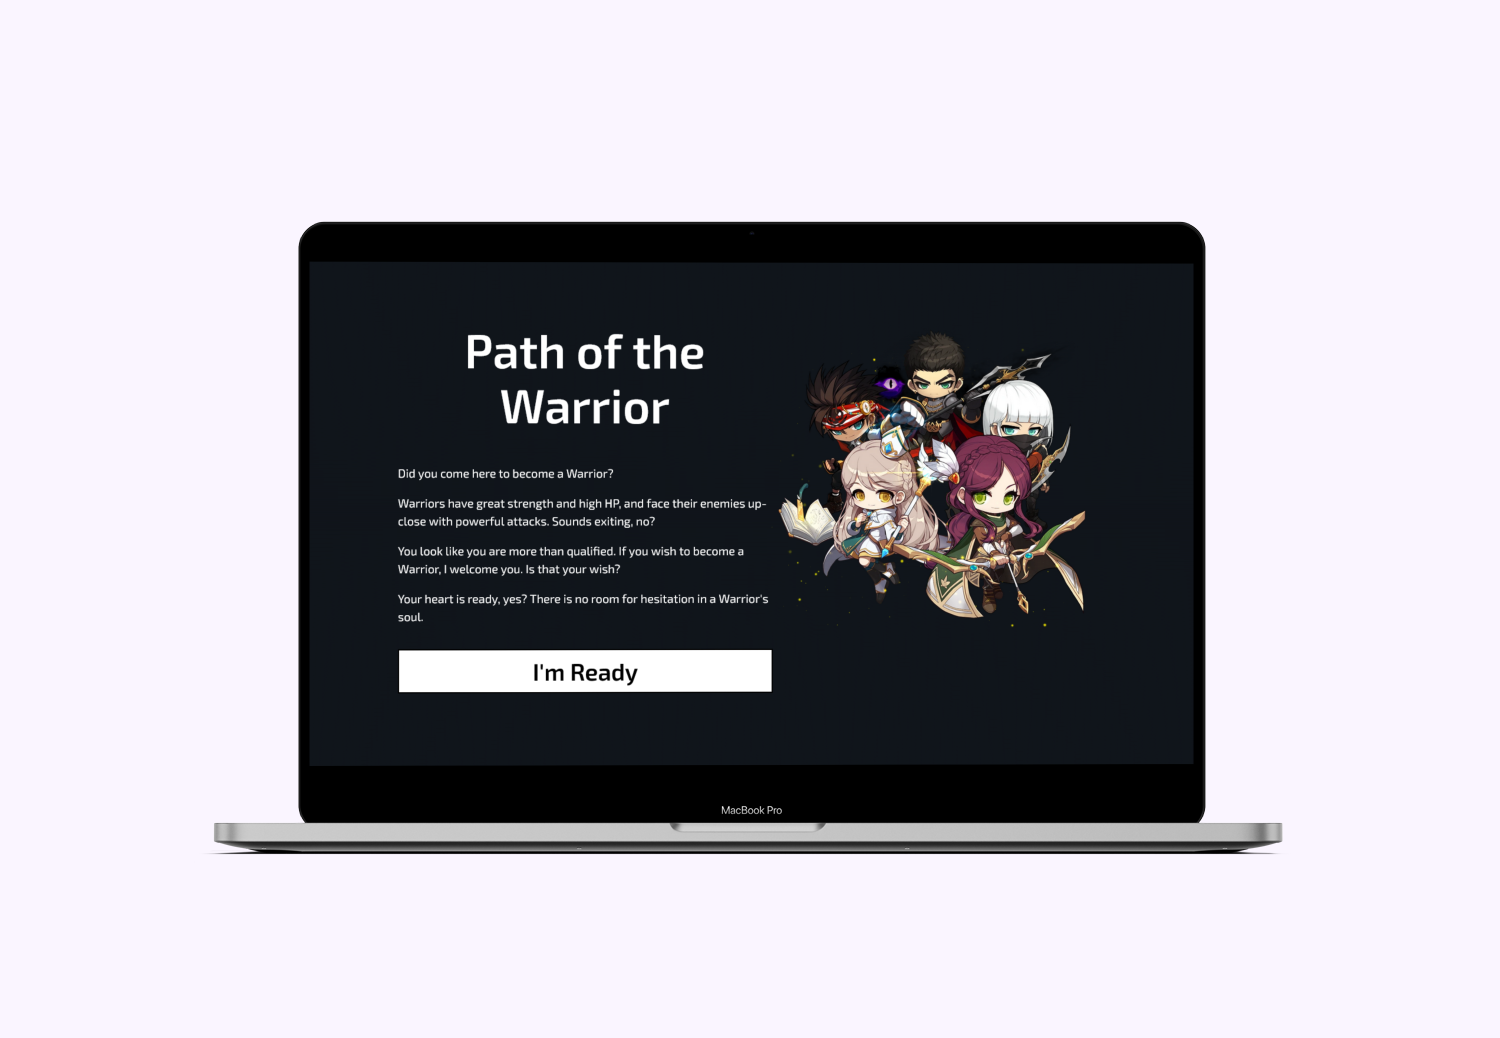 Macbook mockup of Path of the Warrior project